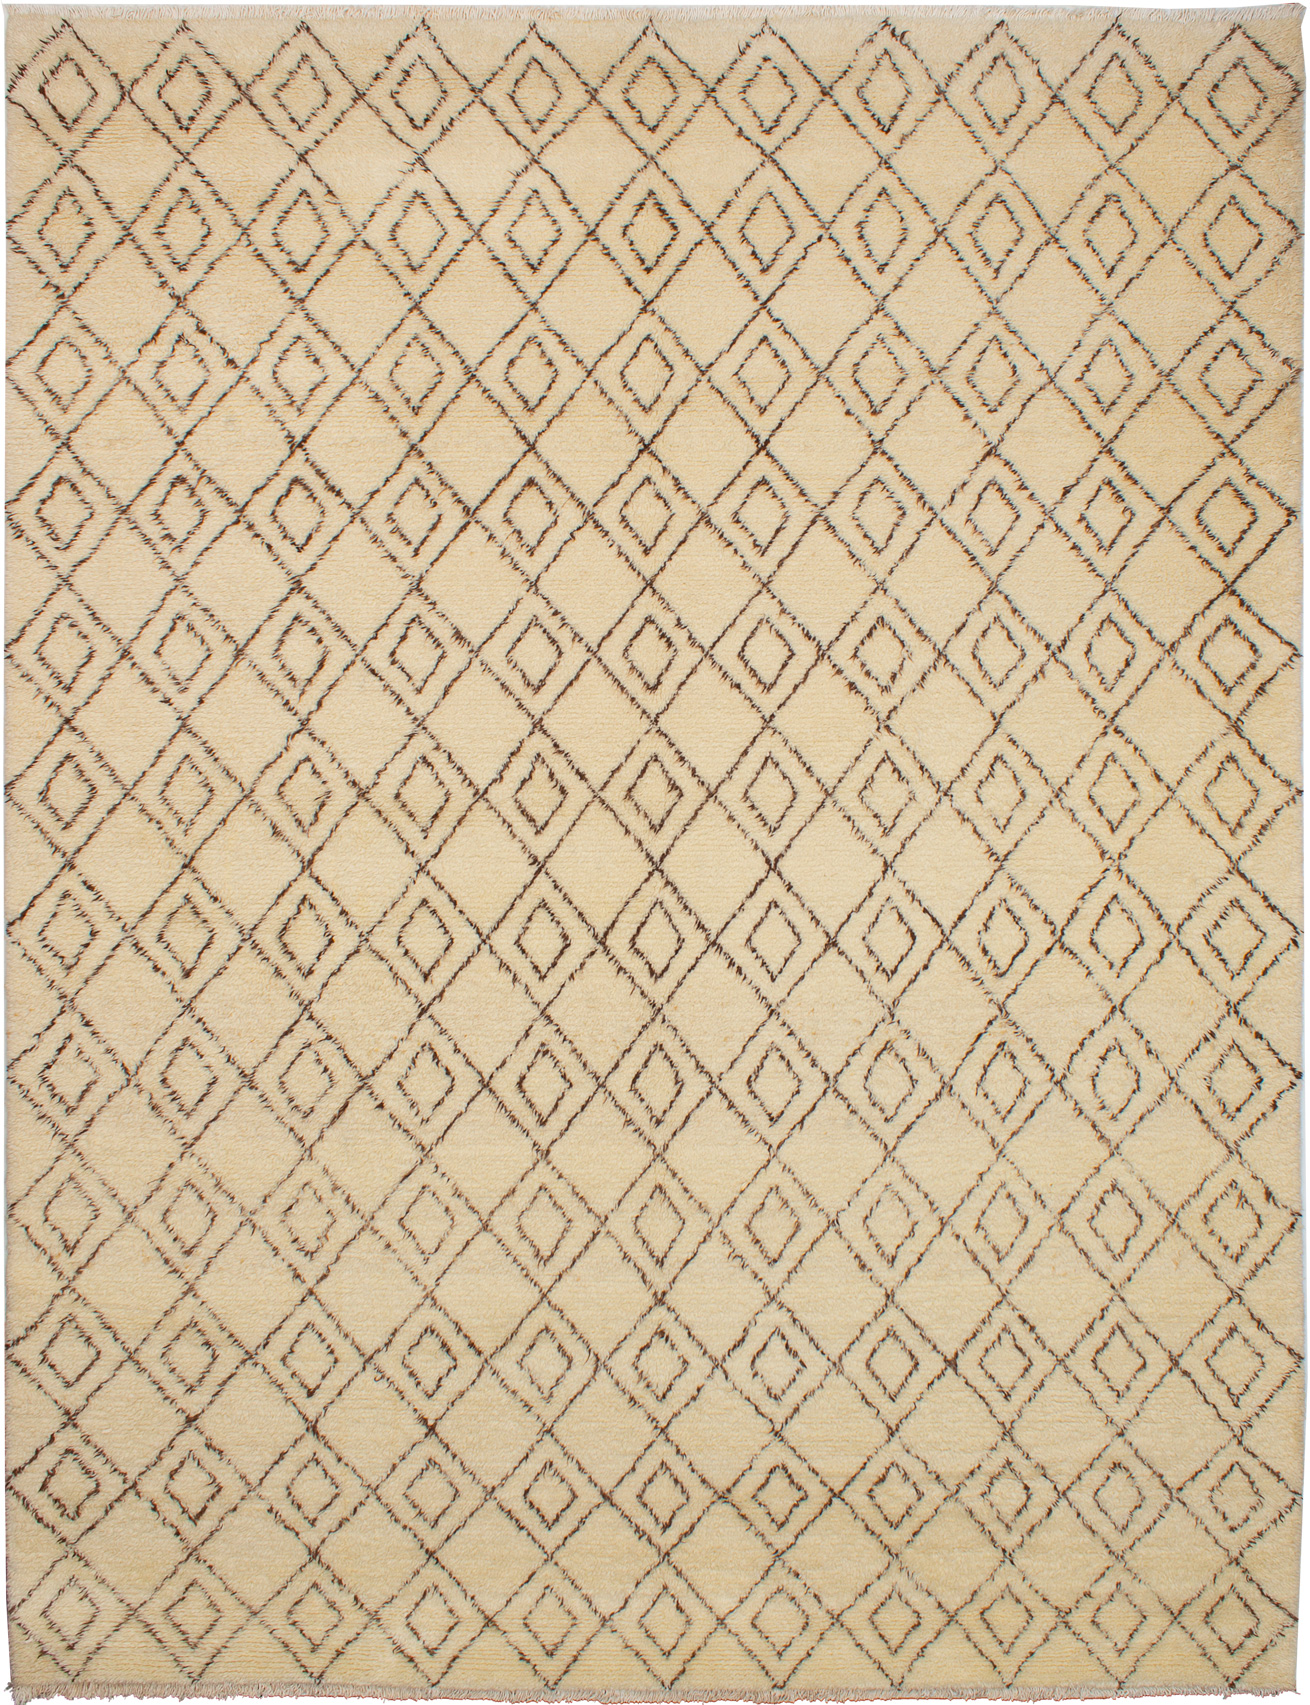 Hand-knotted Royal Maroc Cream Wool Rug 9'2" x 11'10" Size: 9'2" x 11'10"  